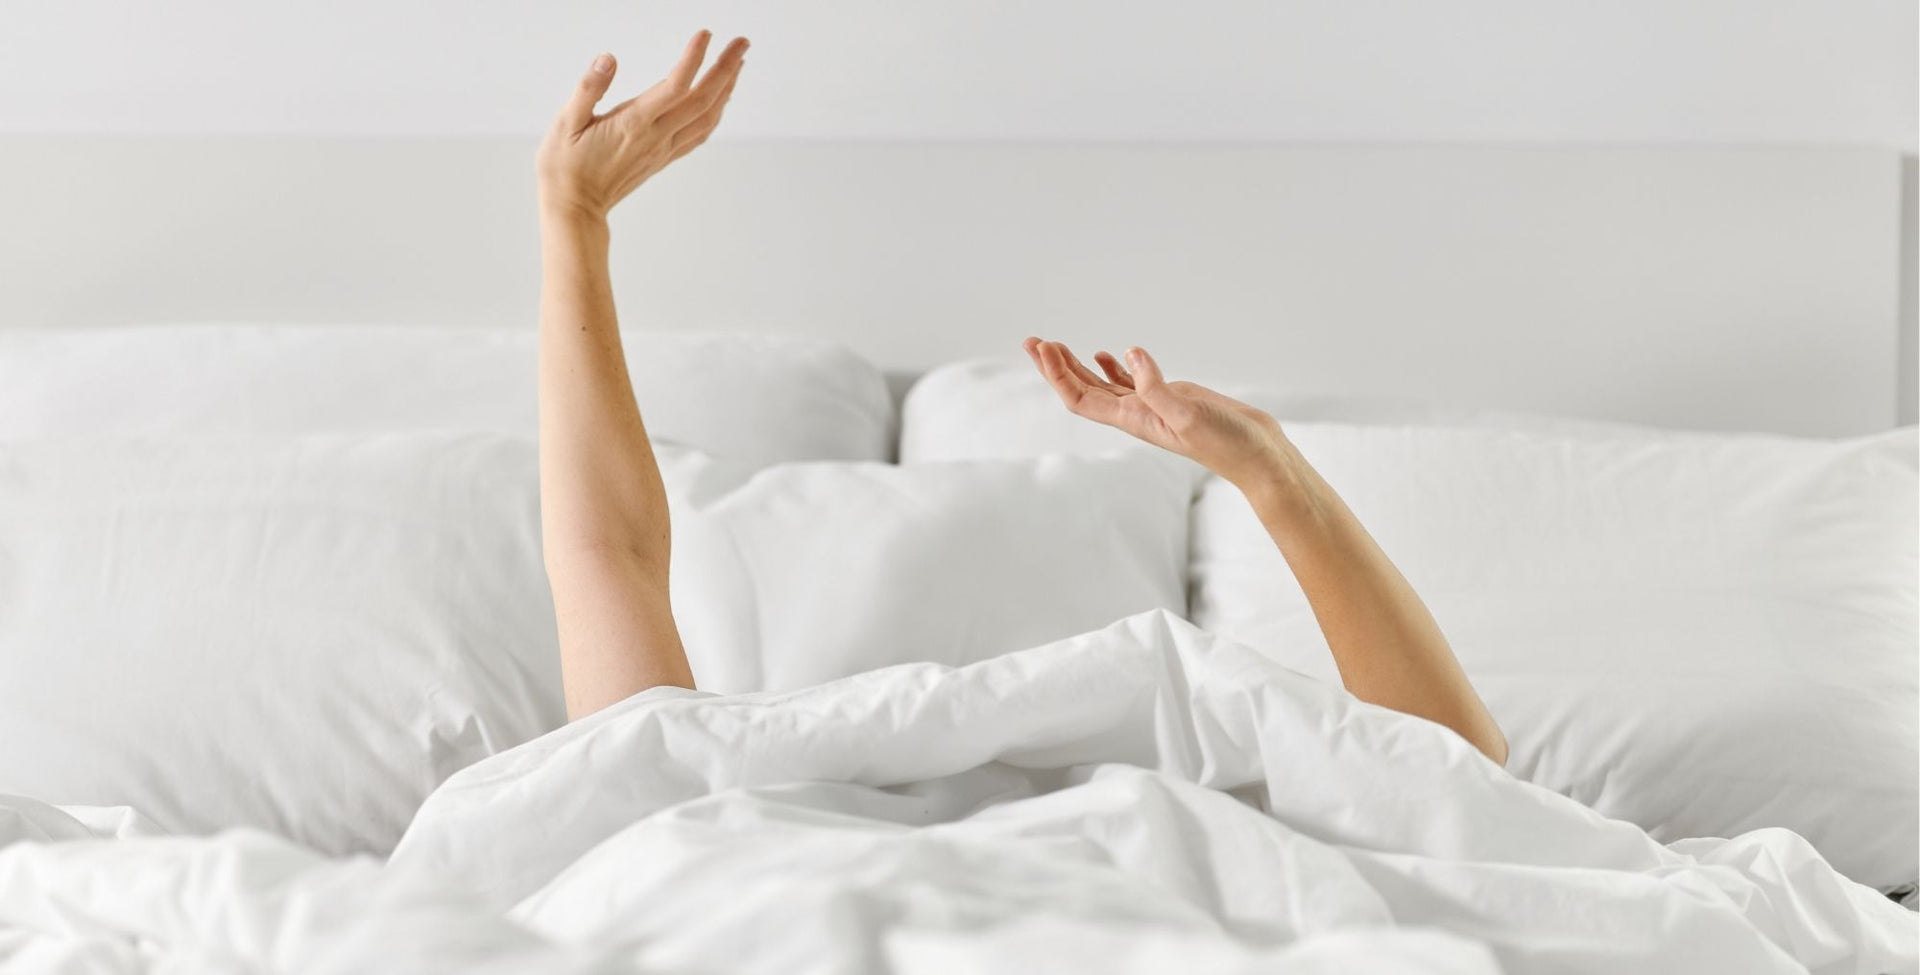 Excited hands sticking up from bedsheets